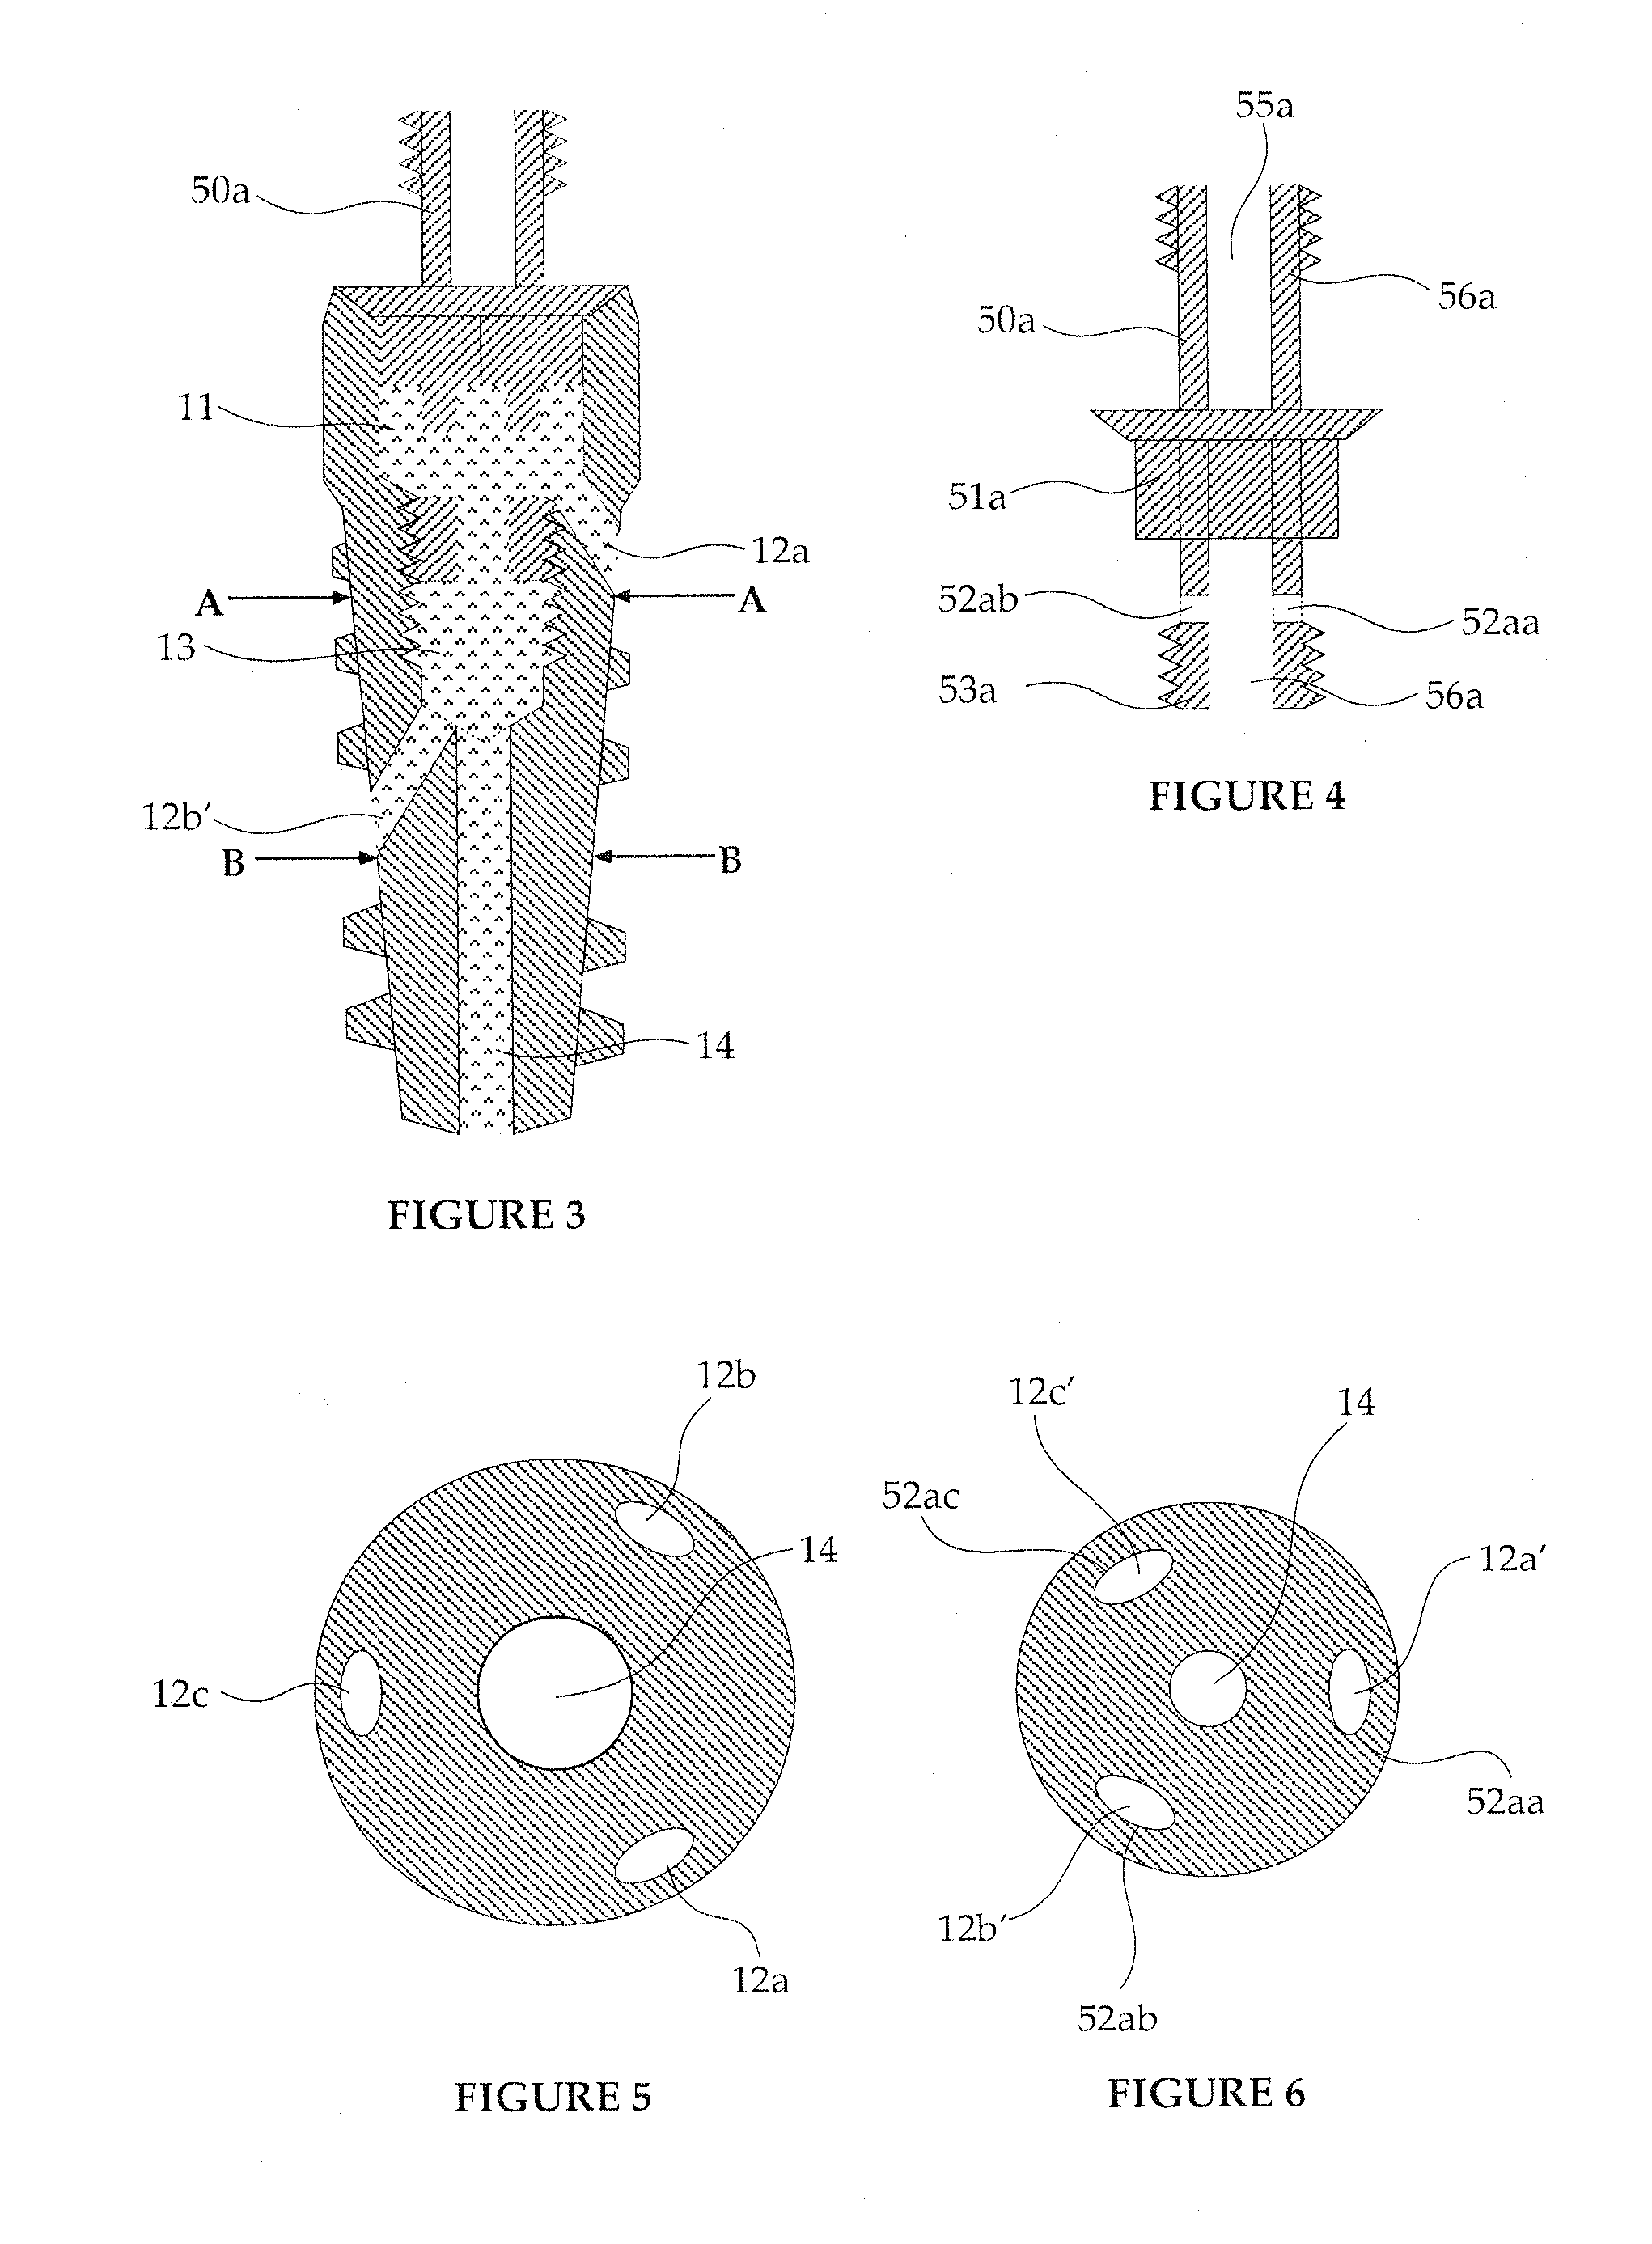 Method for Pretreatment of Wastewater and Recreational water with Nanocomposites